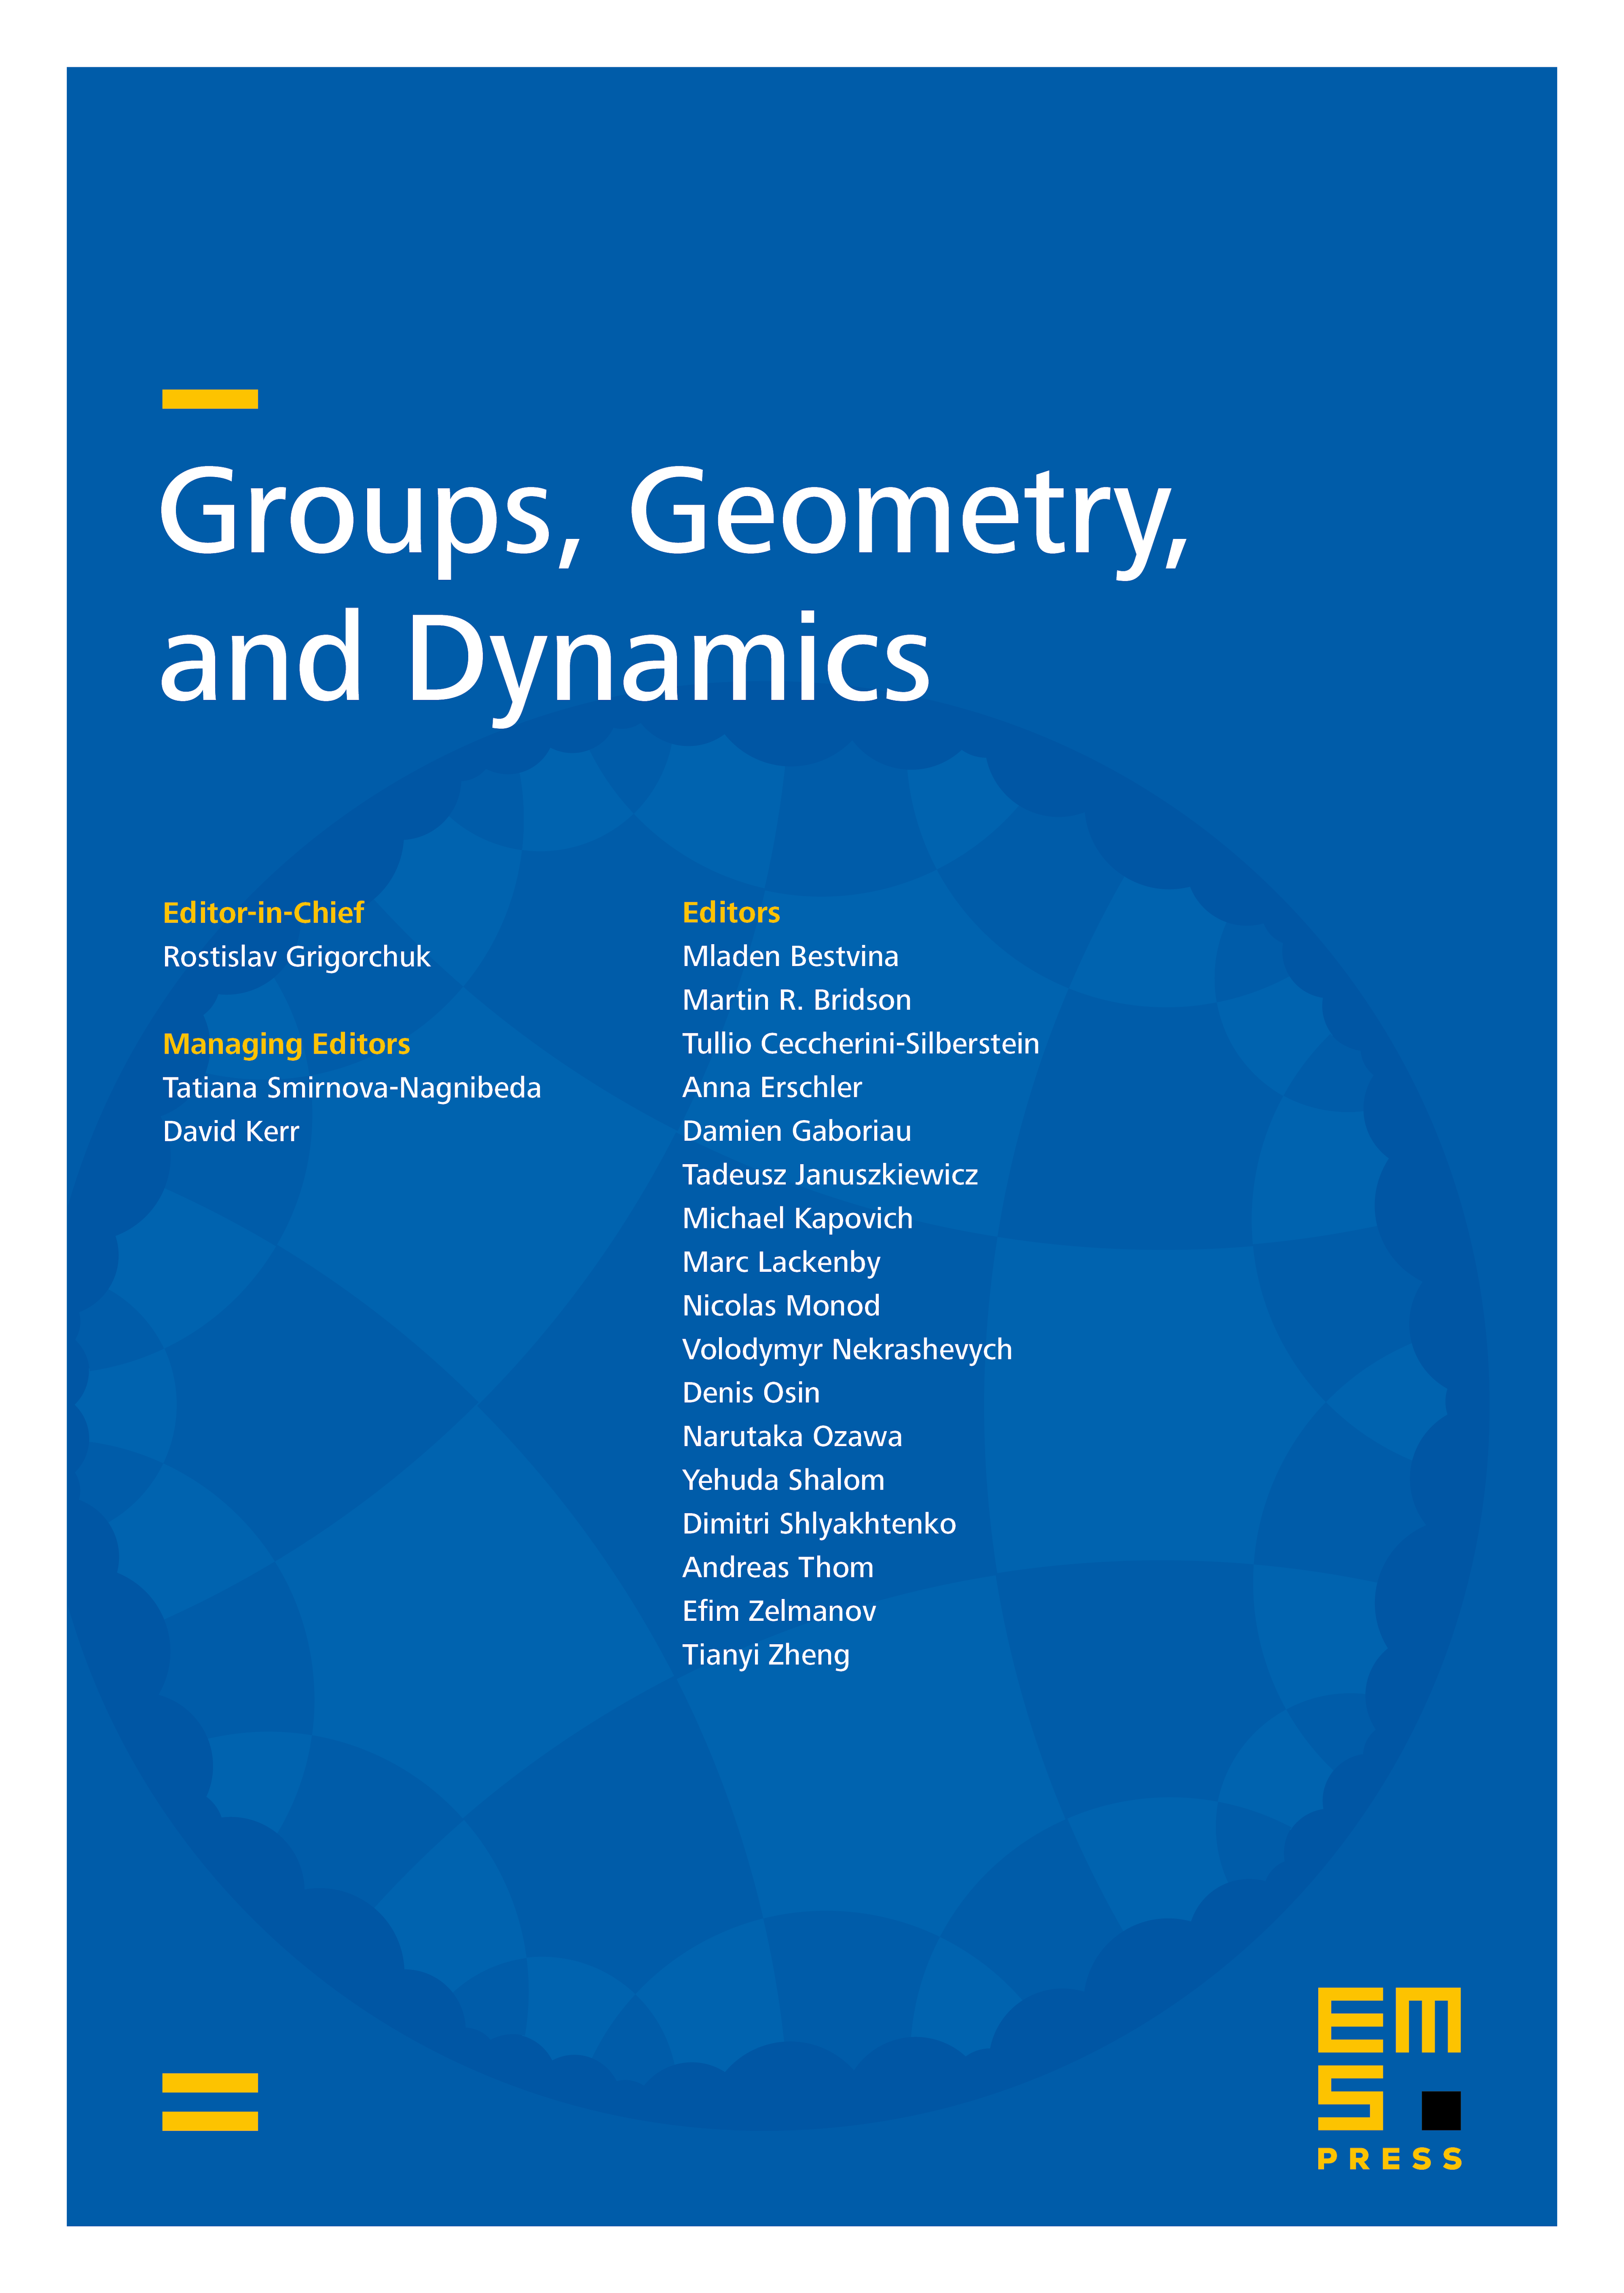 Acylindrical hyperbolicity of Artin groups associated with graphs that are not cones cover